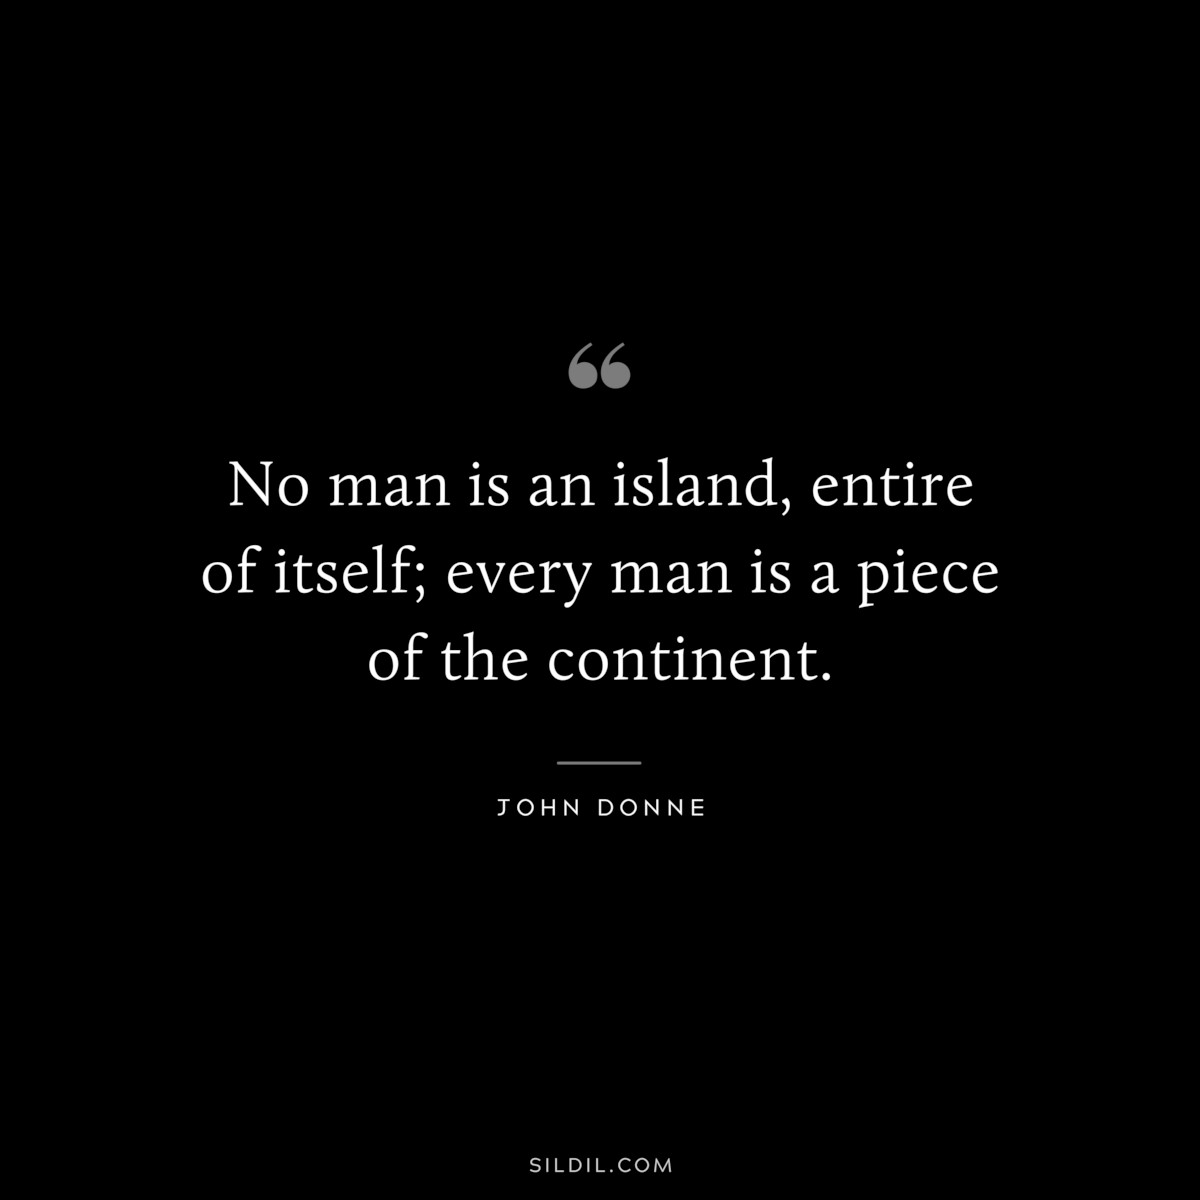 No man is an island, entire of itself; every man is a piece of the continent. ― John Donne